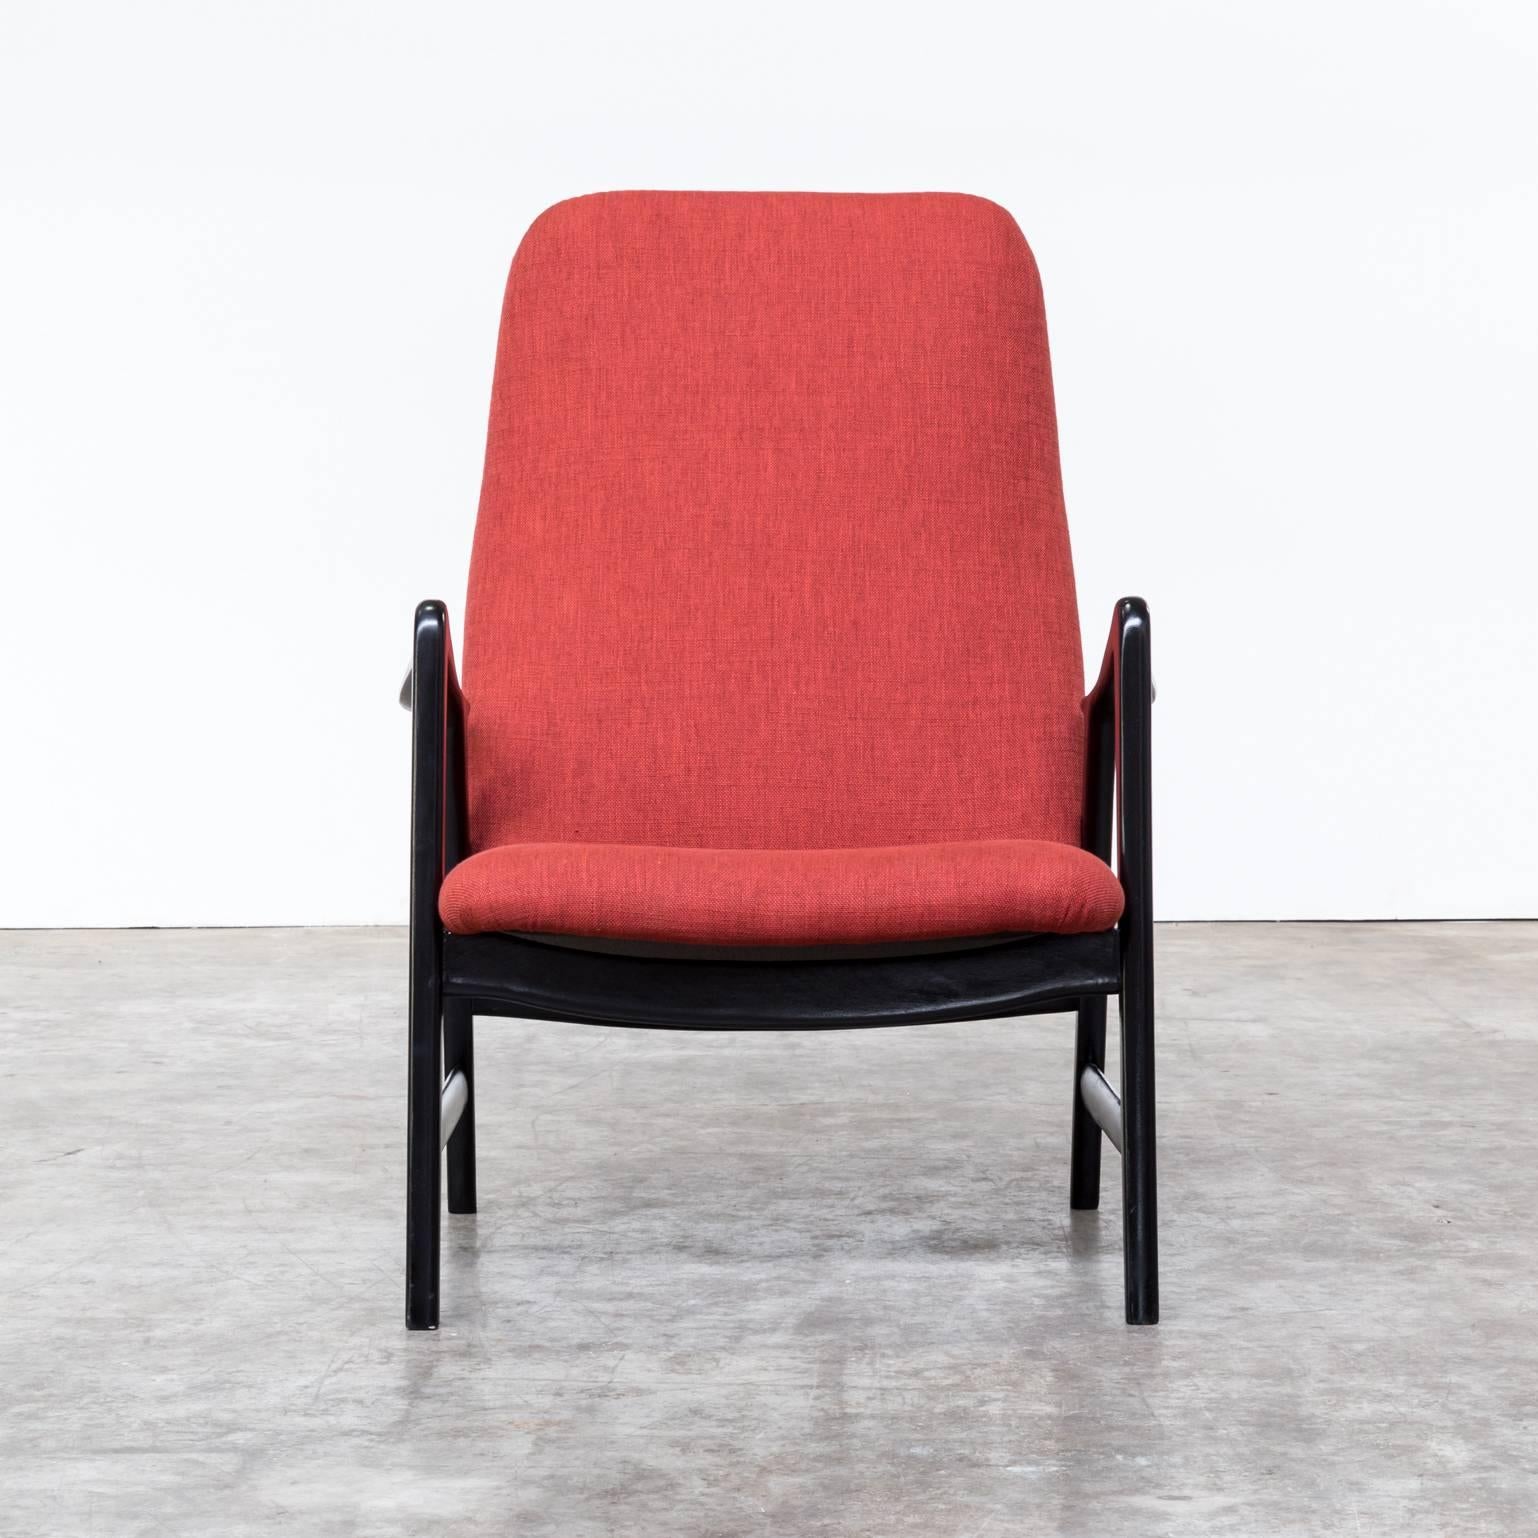 1950s Folke Ohlsson numbered ‘127/57’ fauteuil for Artifort / Dux. Very beautiful fauteuil, new re-upholstery and restored frame. Excellent condition.